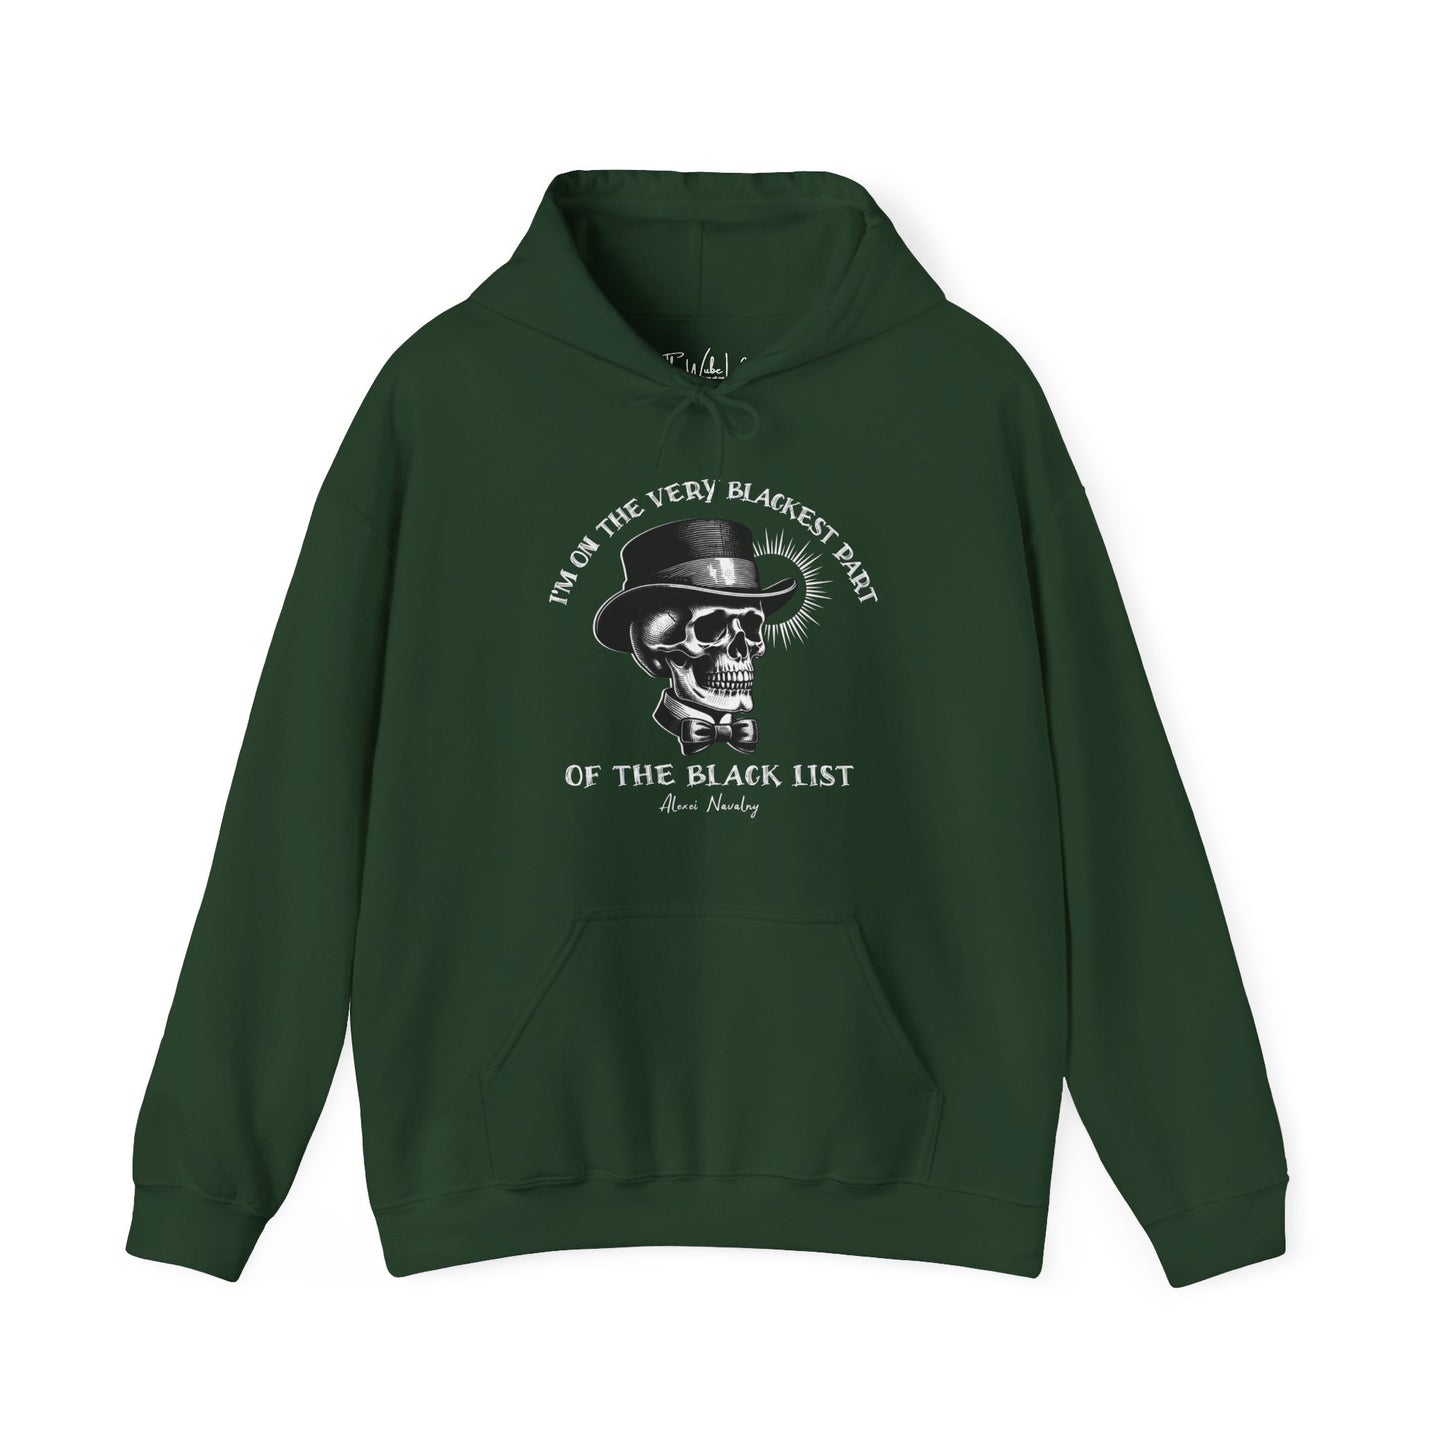 Navalny's "I'm on the very blackest part of the black list" Gildan 18500 hooded sweatshirt in forest green.